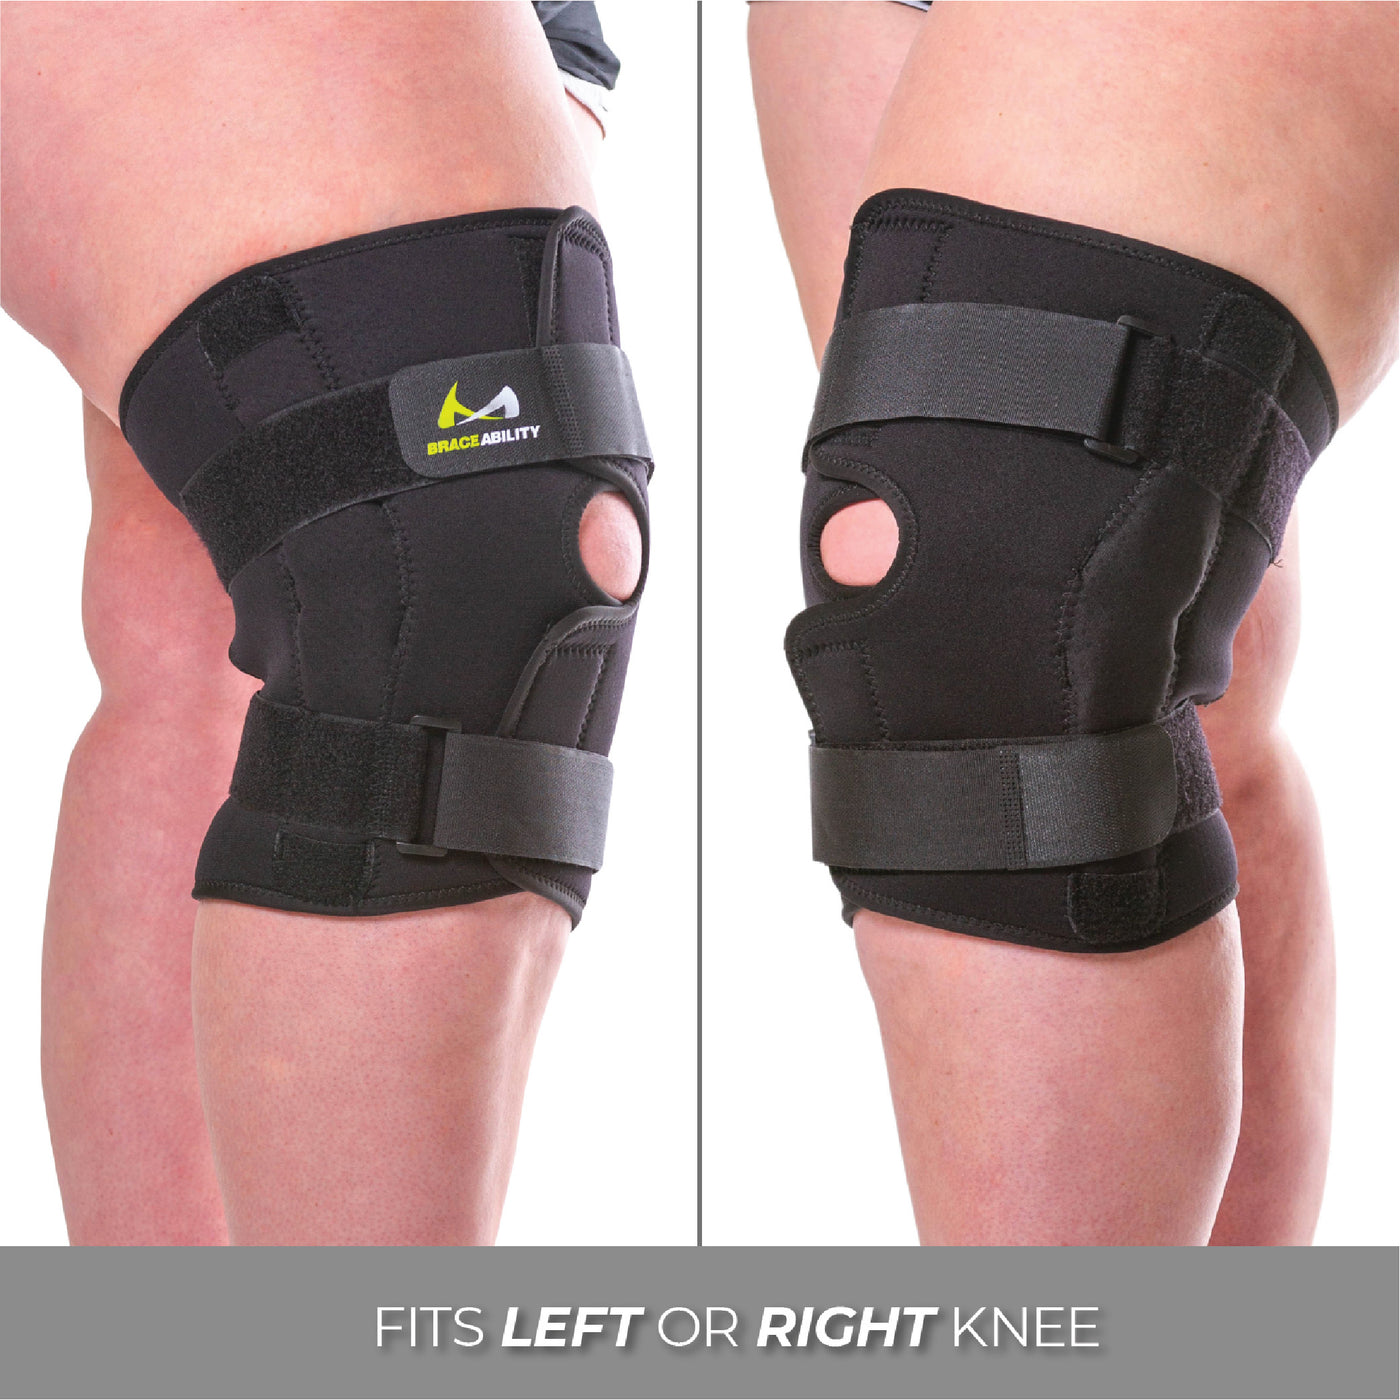 Our plus size knee brace can be worn on your left or right knee by men or women